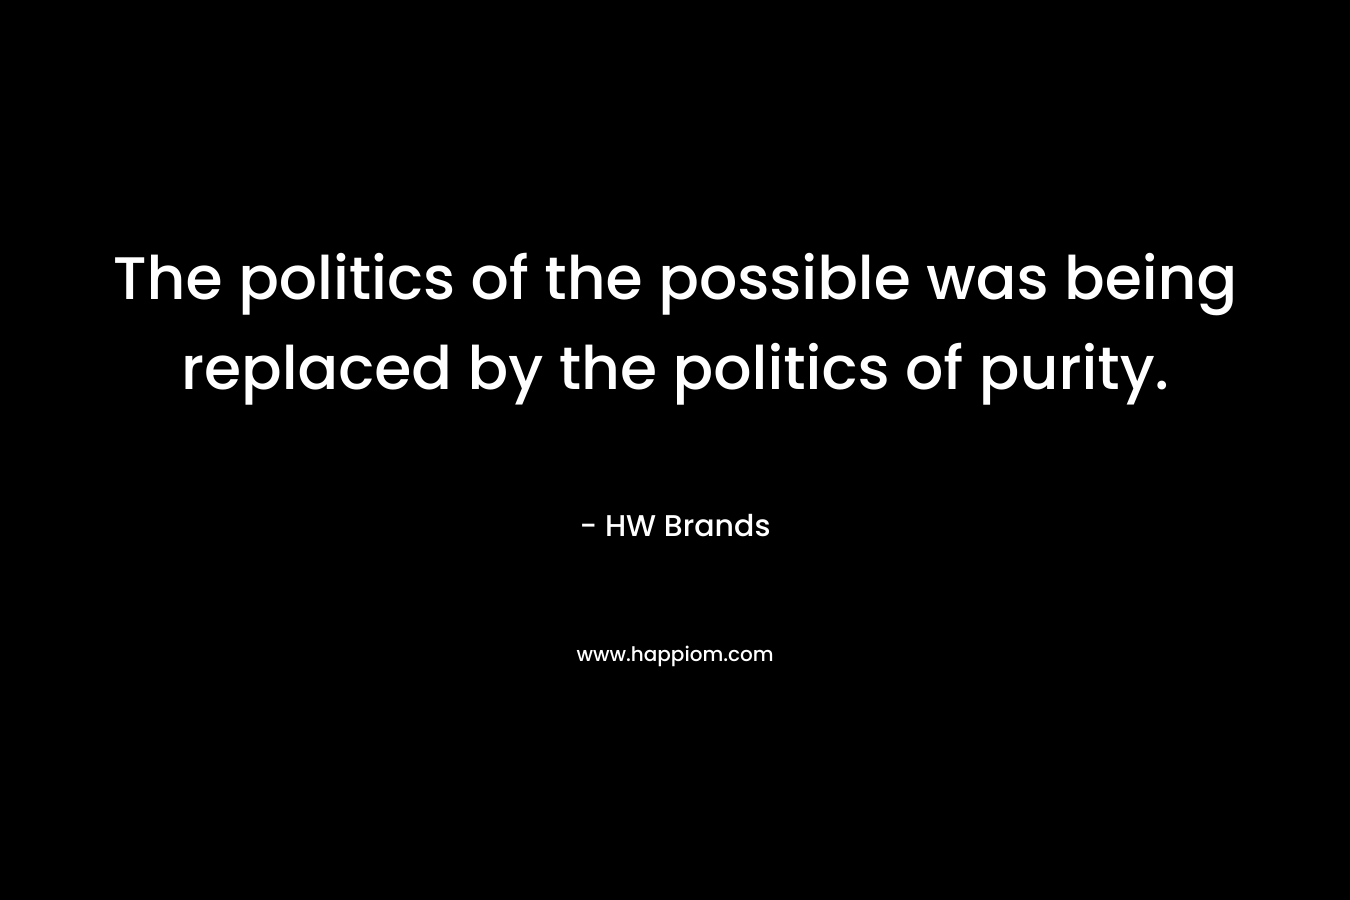 The politics of the possible was being replaced by the politics of purity.